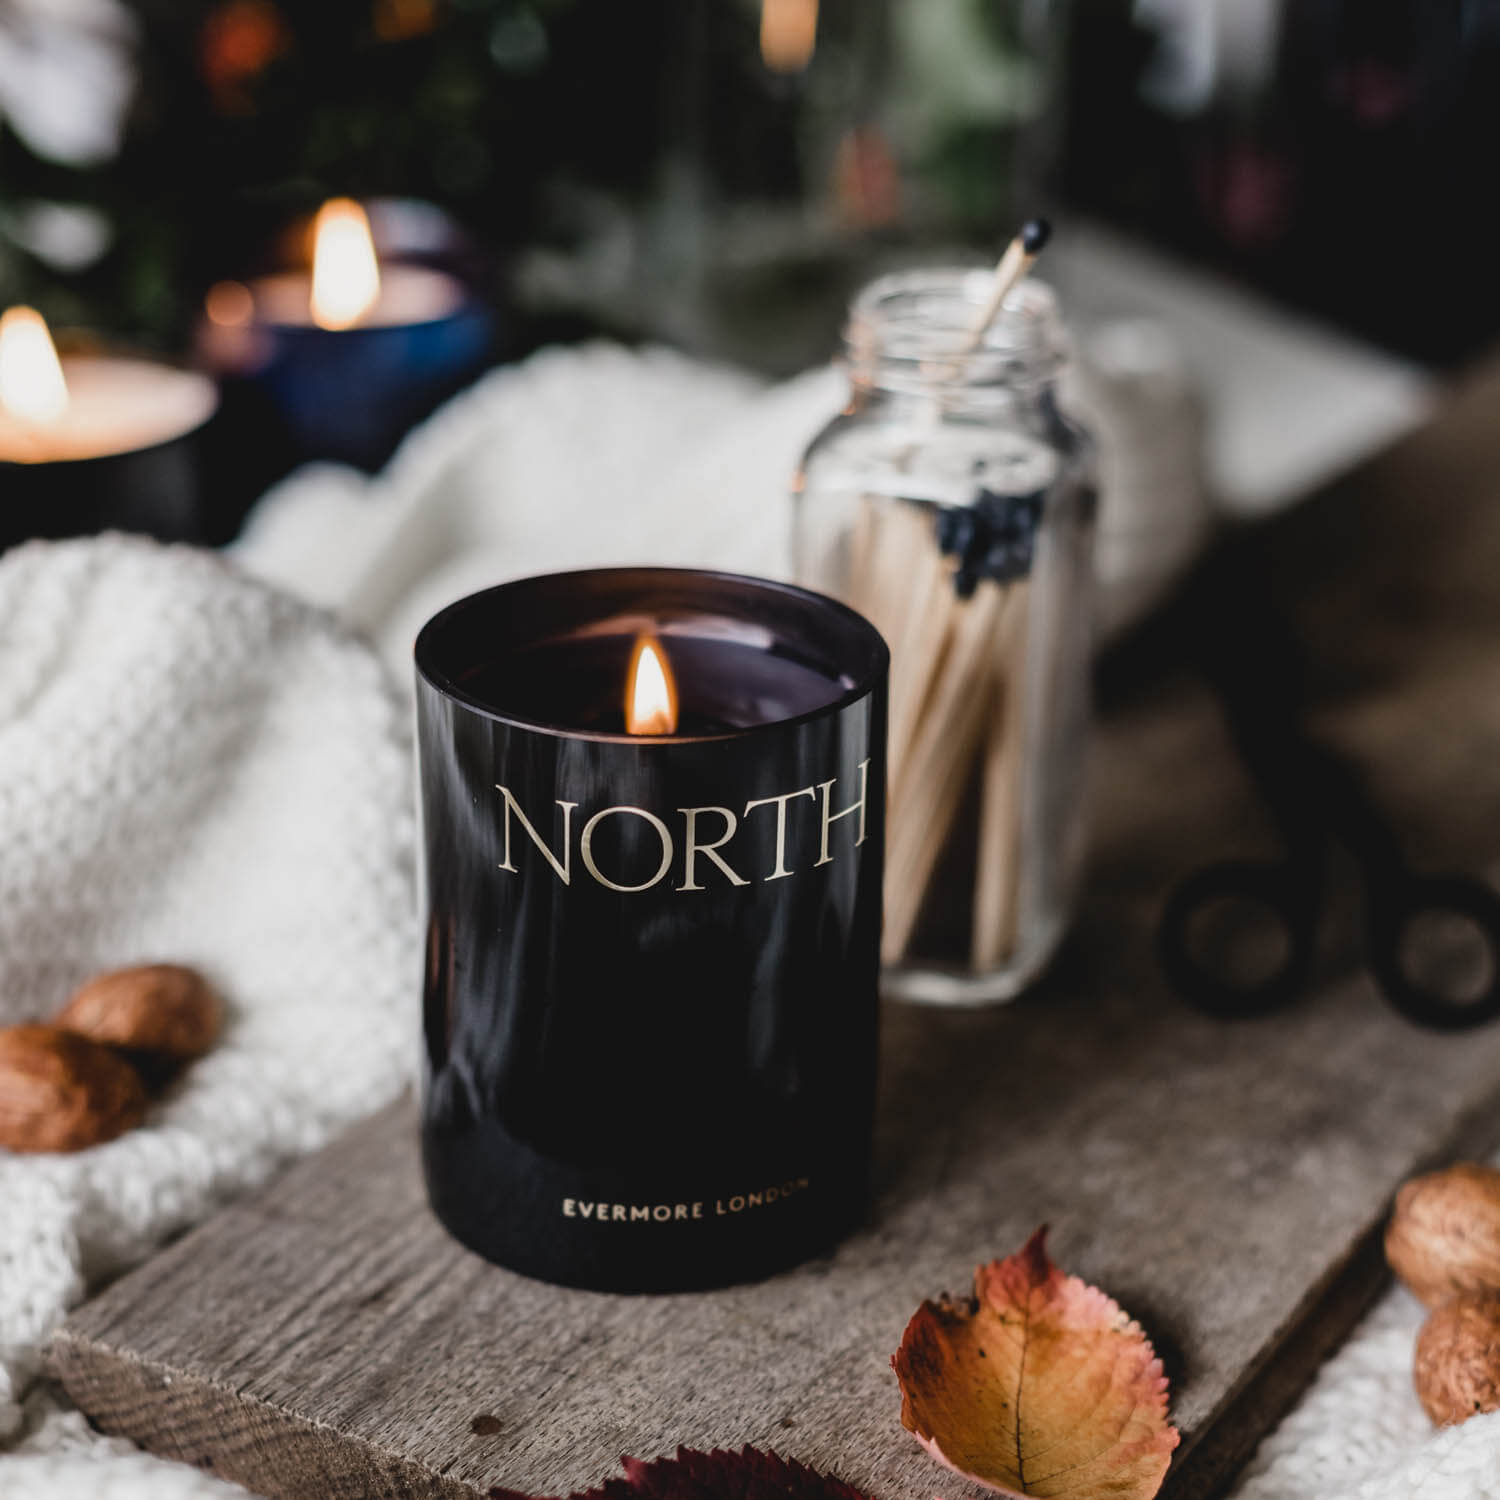 Evermore North Scented Candle - Osmology Scented Candles & Home Fragrance